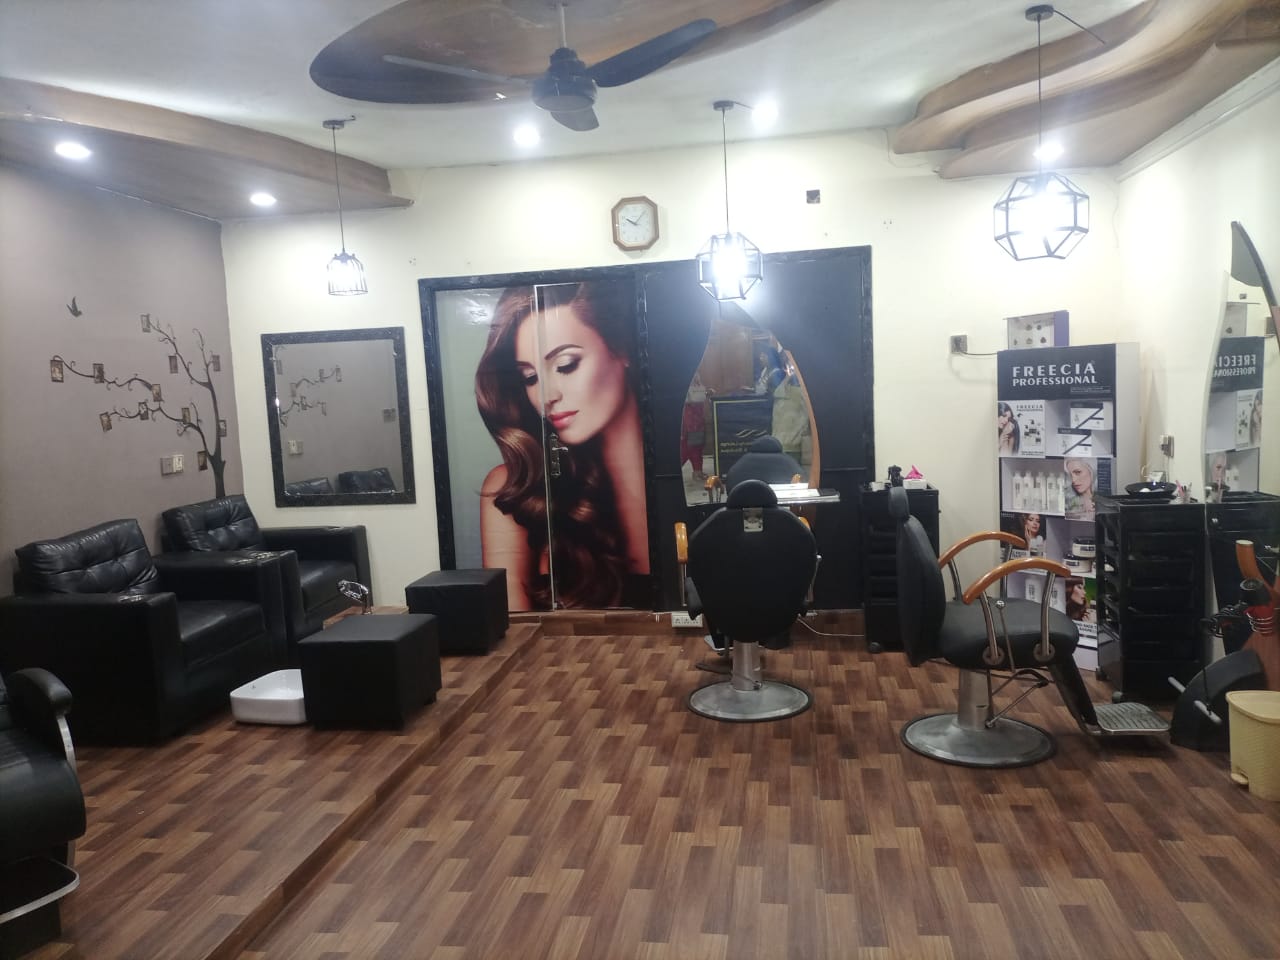 44% off Rs 6999 only for Keratin Treatment (Short Length) + Hair Cut with Blowdry + Shoulder Massage + Eyebrows & Upper lips by Mirrors Beauty Lounge, Wapda town, Lahore.